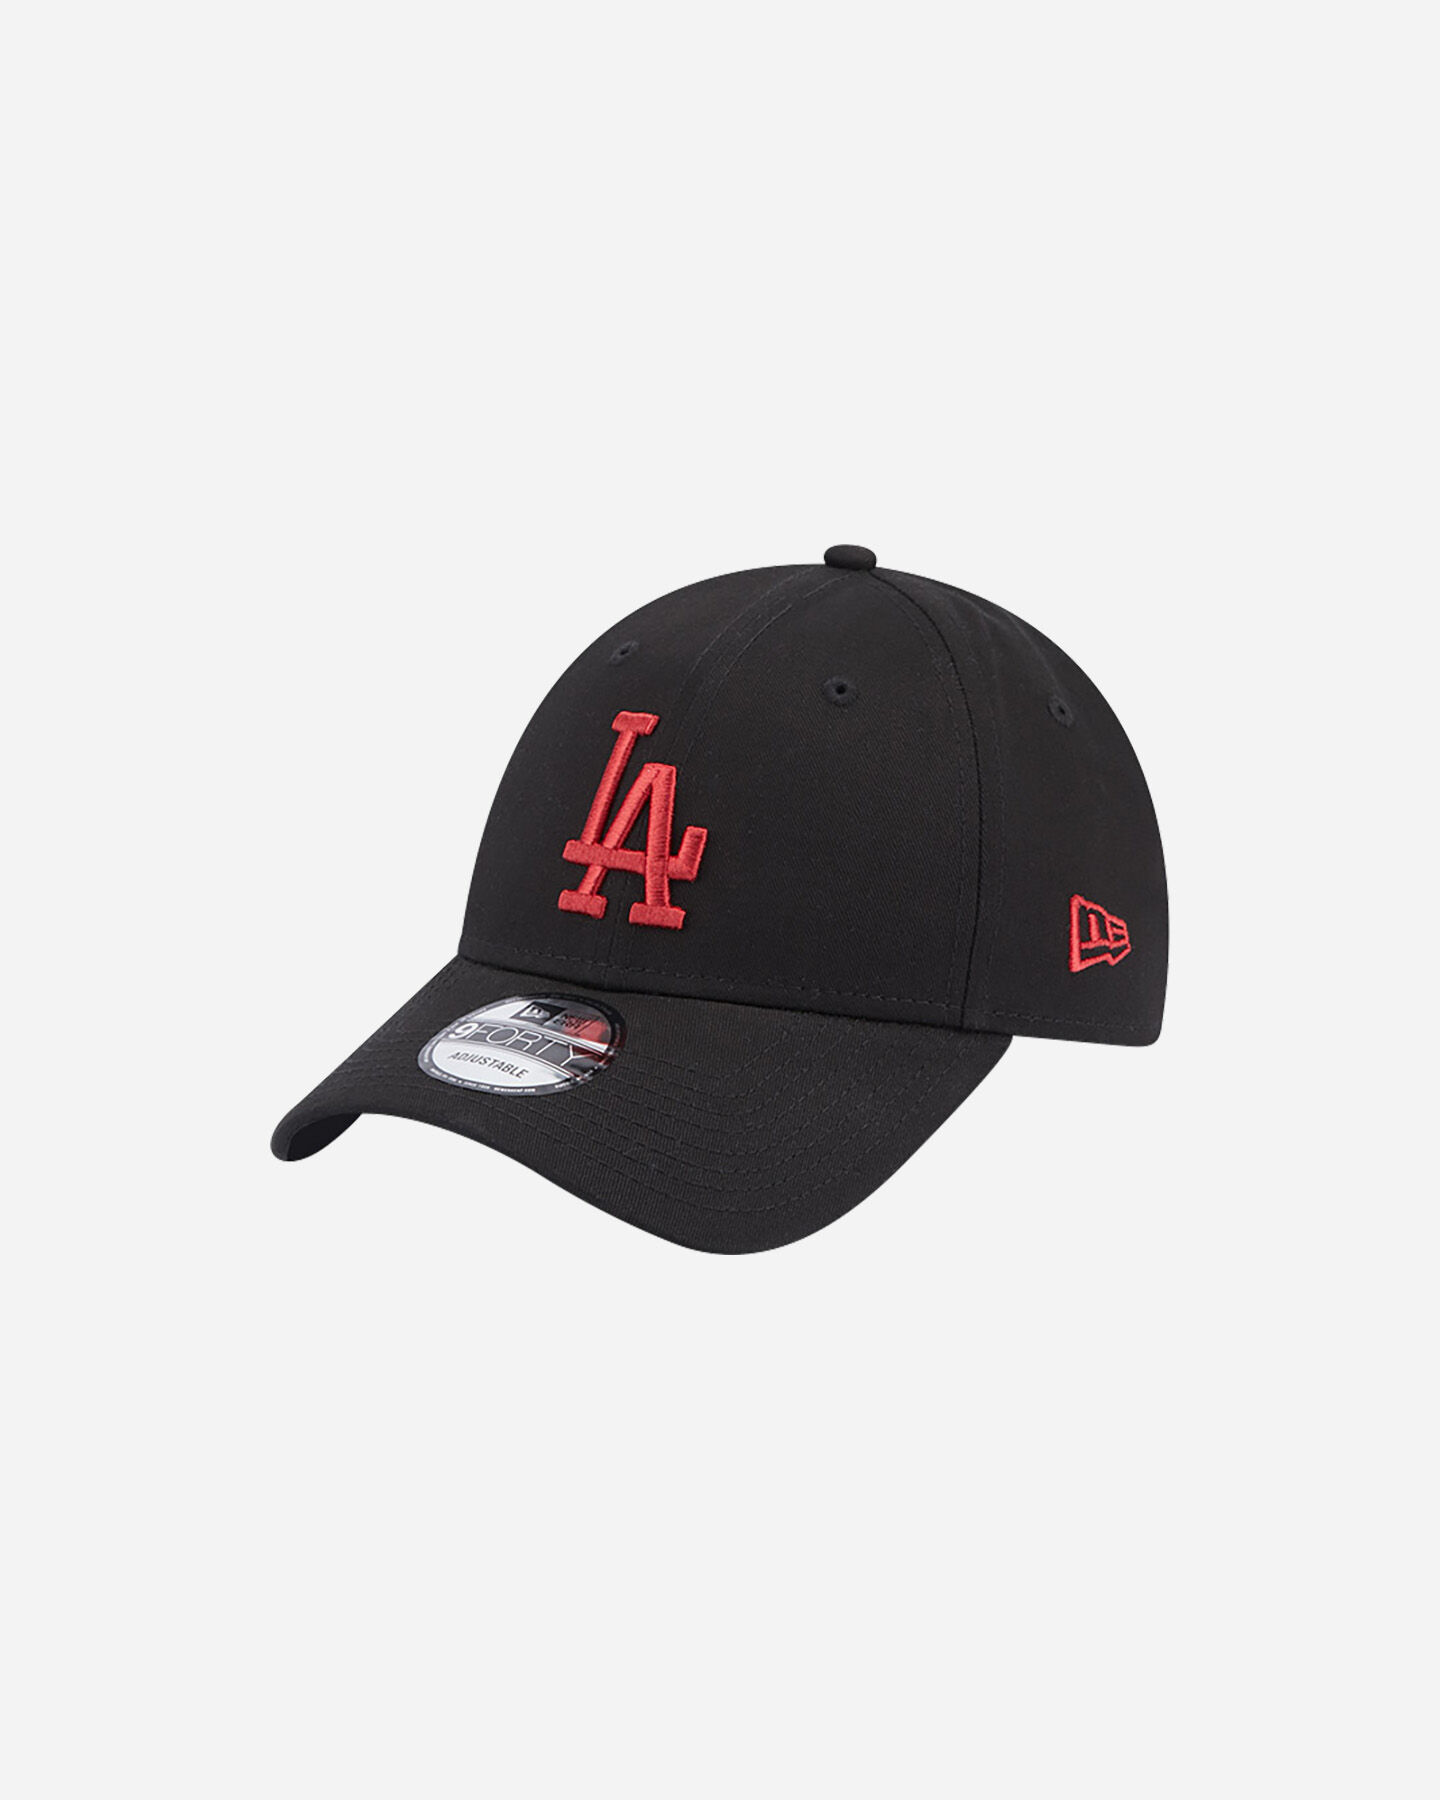  Cappellino NEW ERA 9FORTY MLB LEAGUE LOS ANGELES DODGERS  S5606276|001|OSFM scatto 0